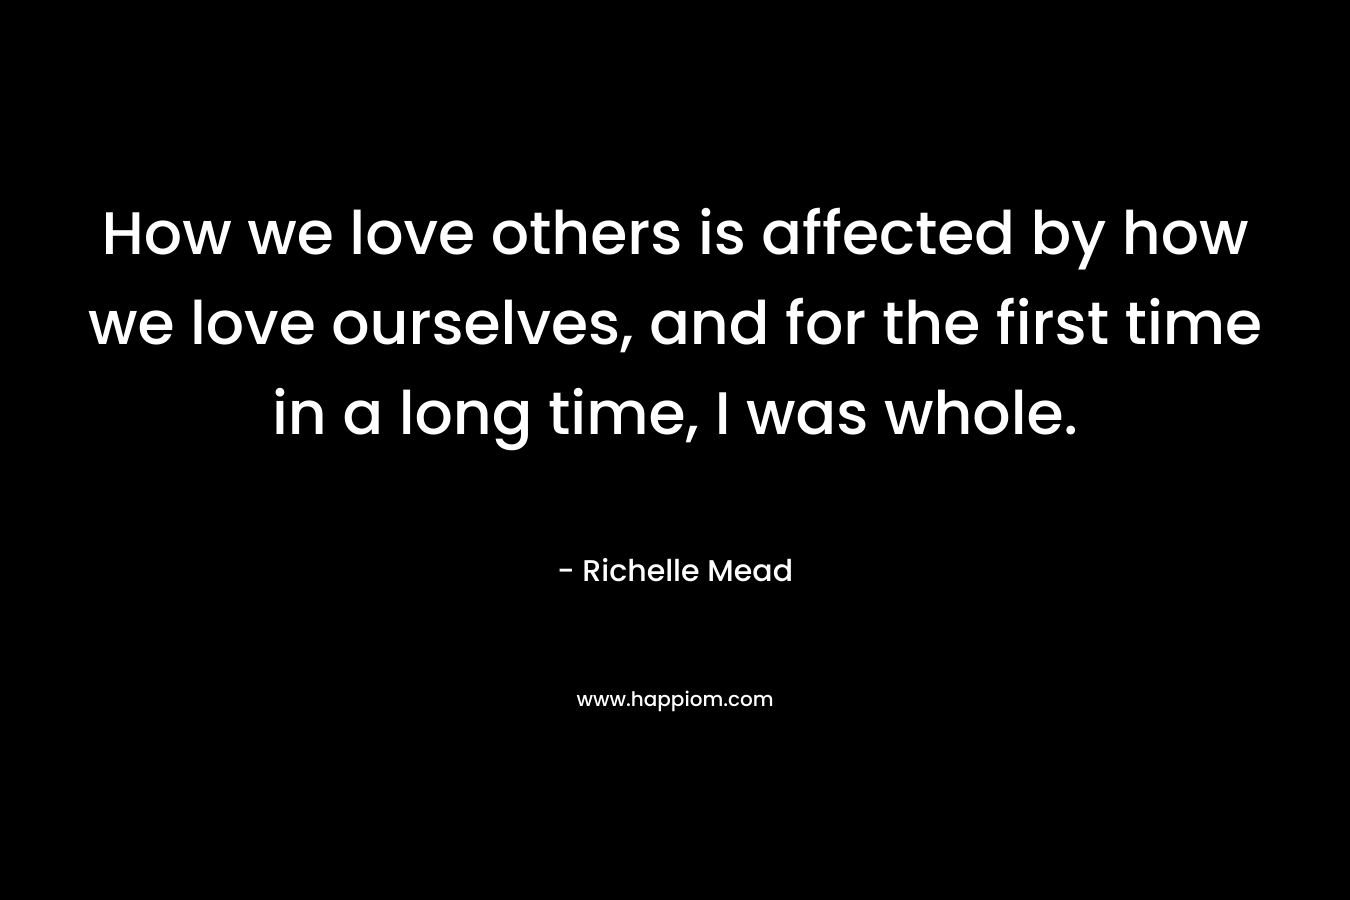 How we love others is affected by how we love ourselves, and for the first time in a long time, I was whole.